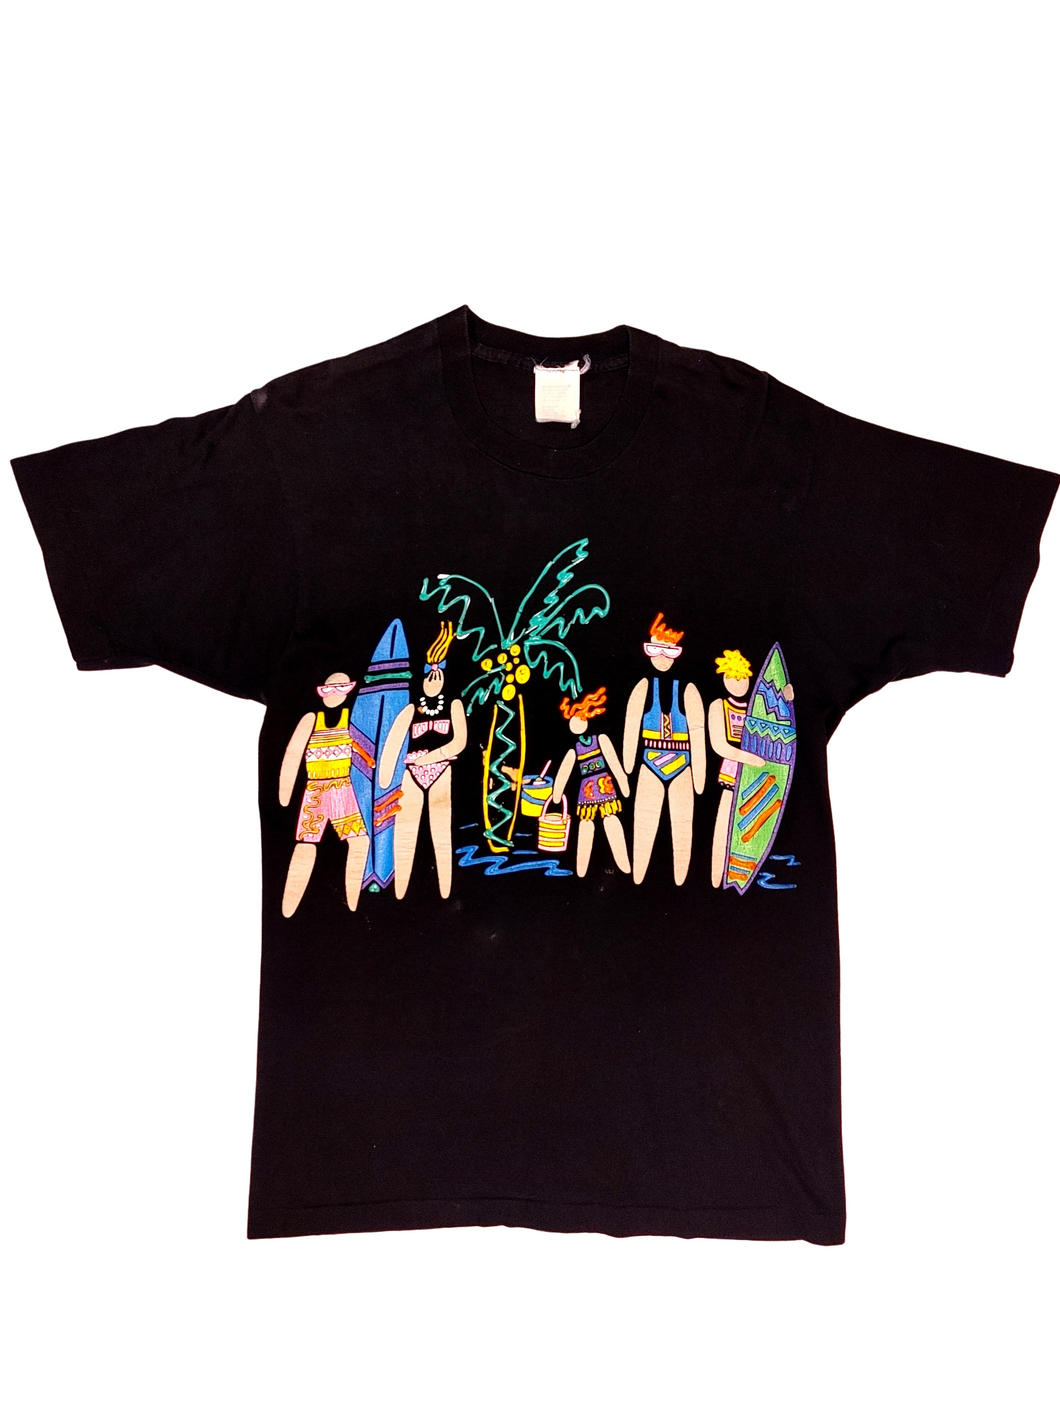 80s Pals at the Beach with Funky Hair T-Shirt - Size XL